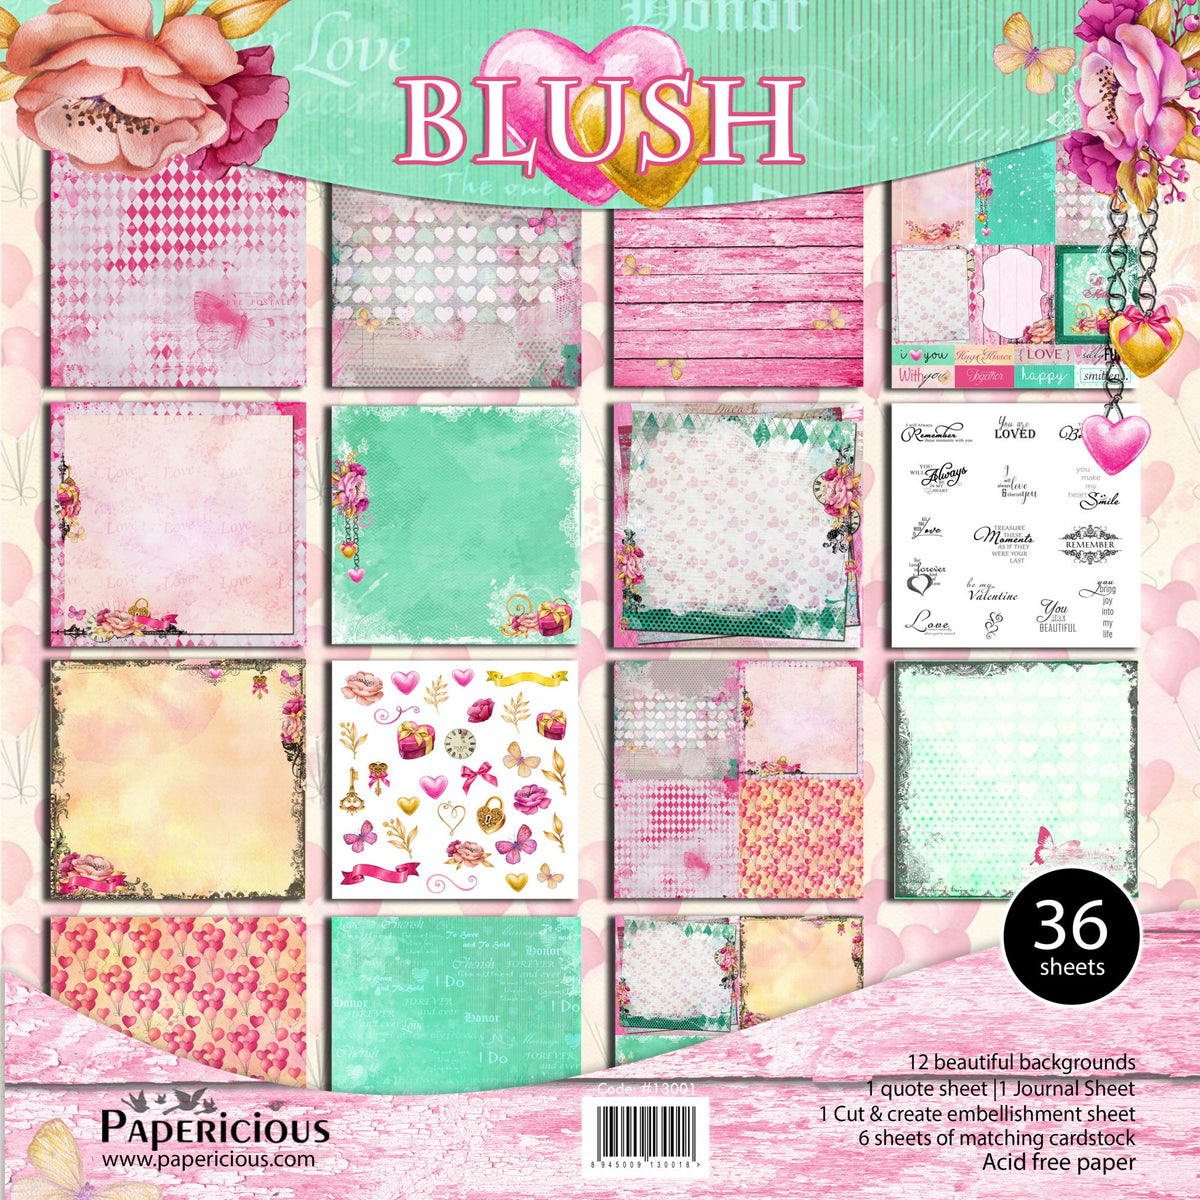 PAPERICIOUS - Blush - Designer Pattern Printed Scrapbook Papers 12x12 inch / 36 sheets